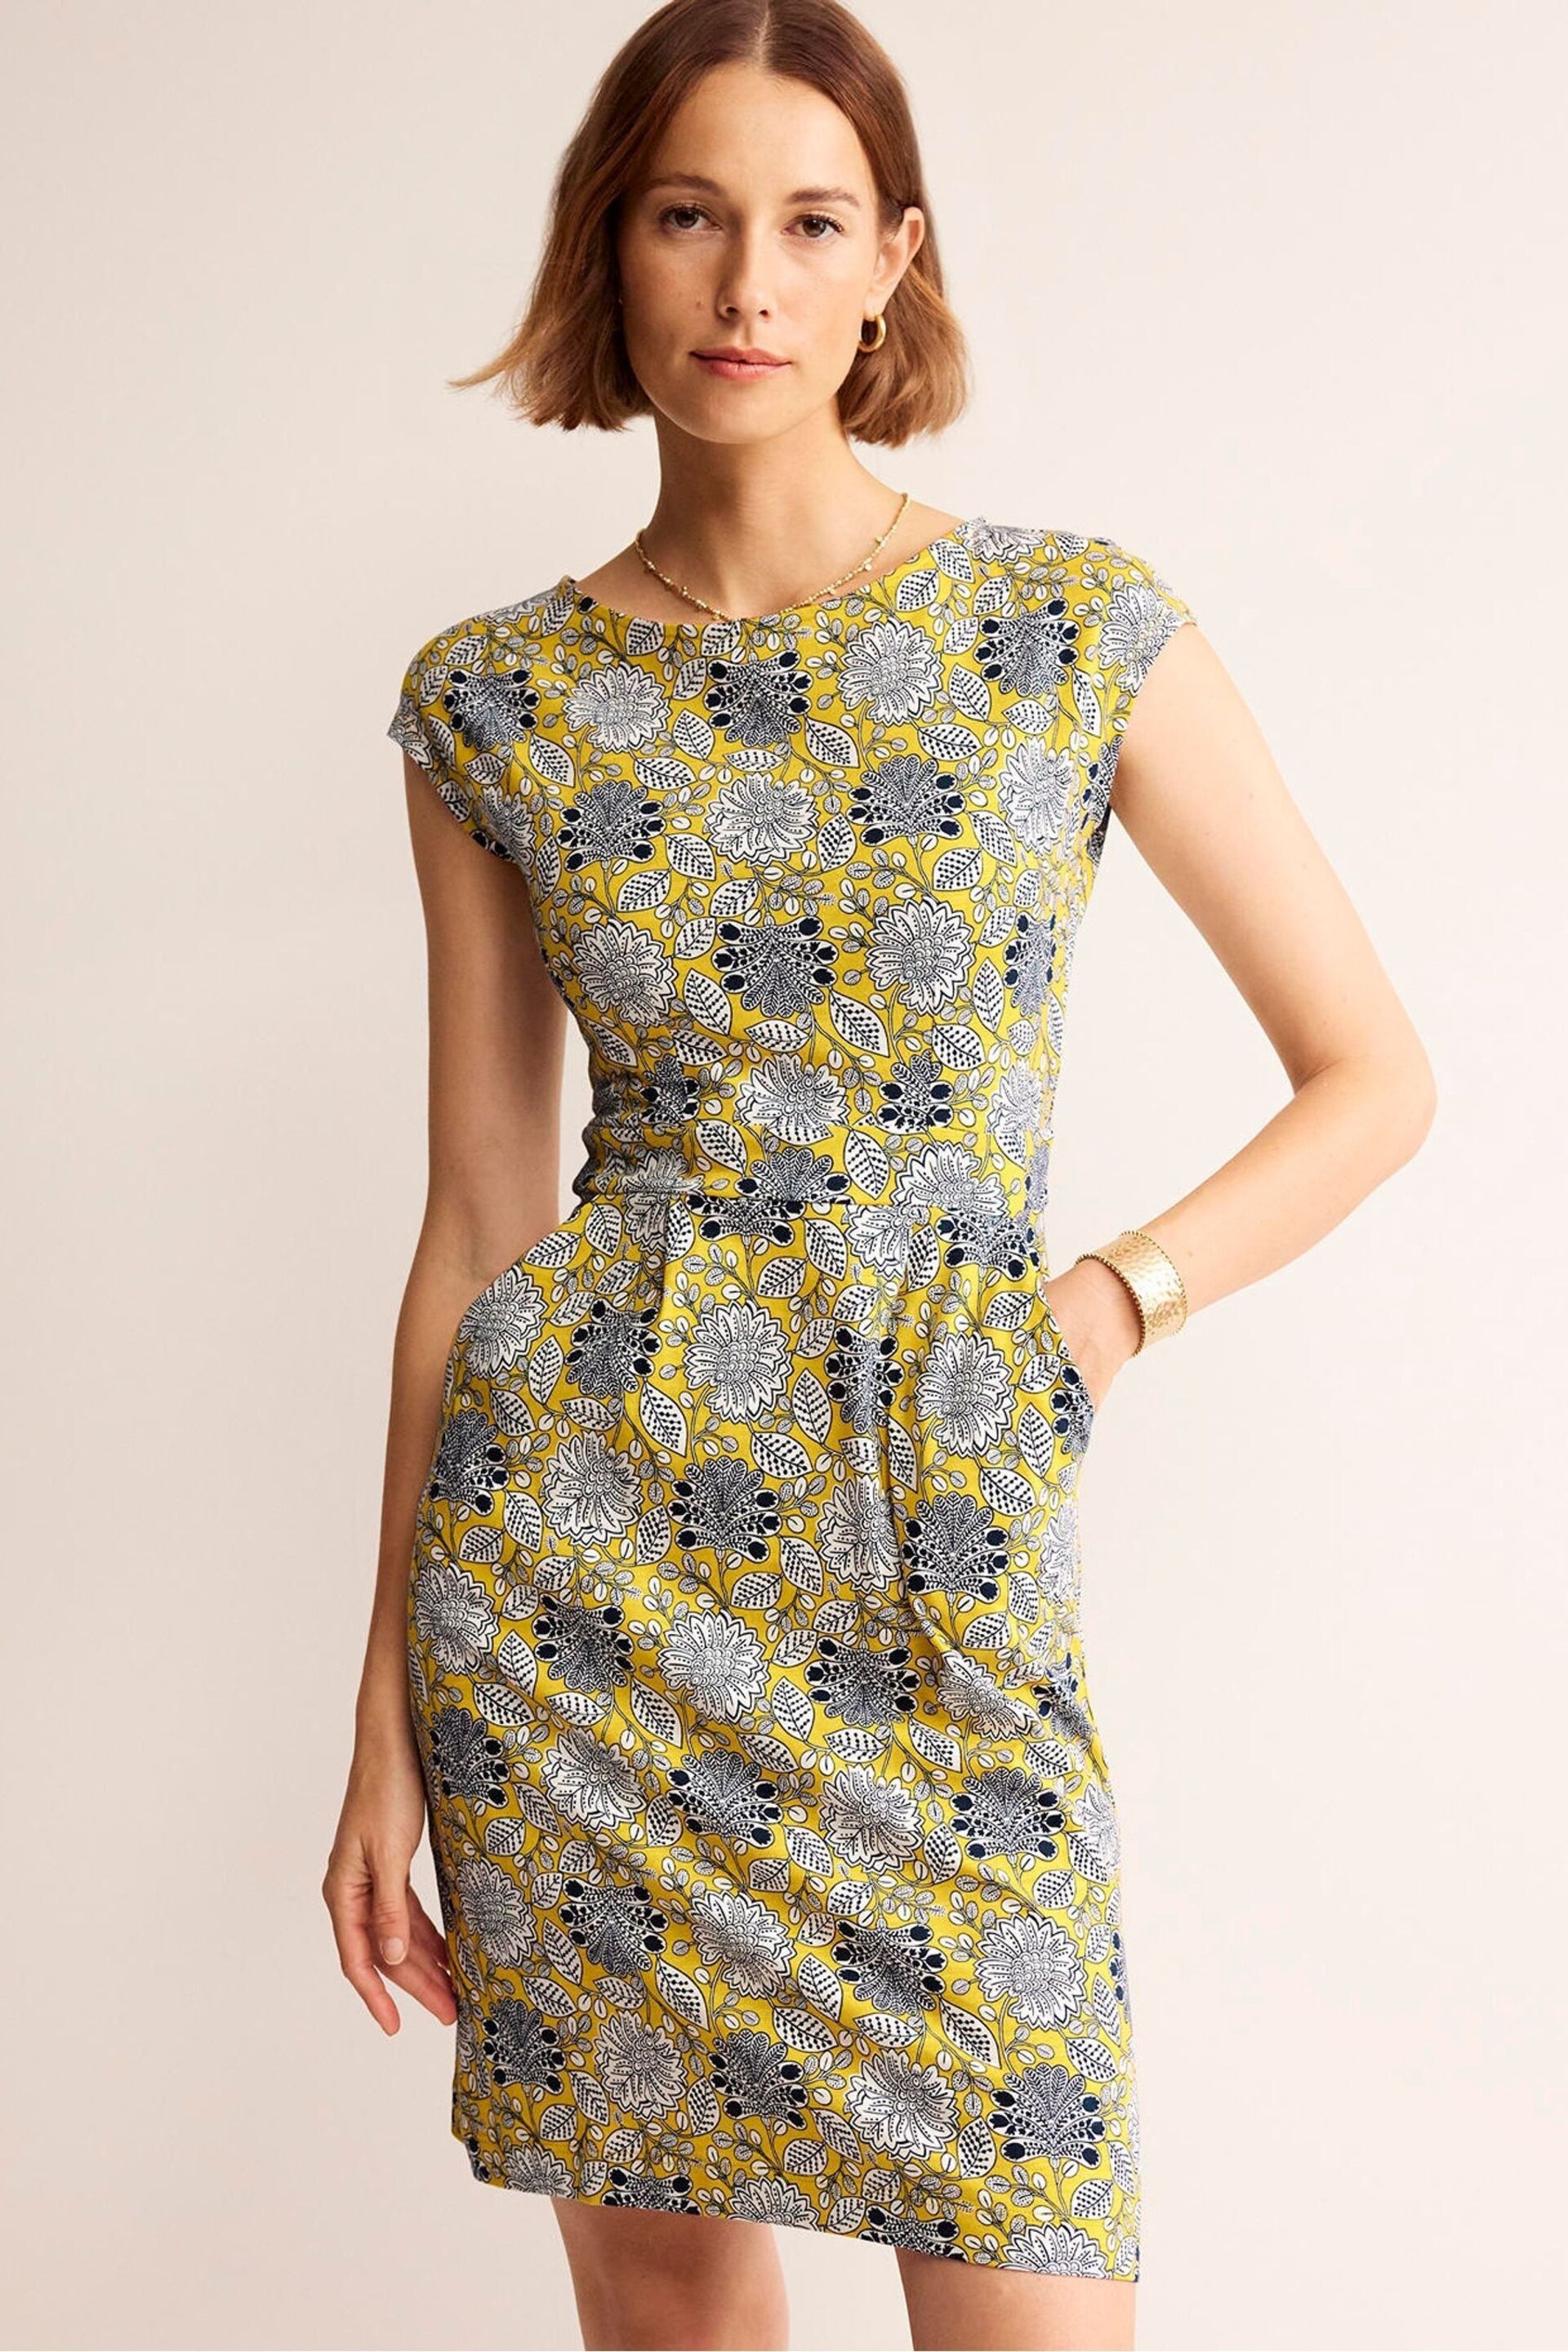 Boden Yellow Petite Florrie Jersey Dress - Image 1 of 5